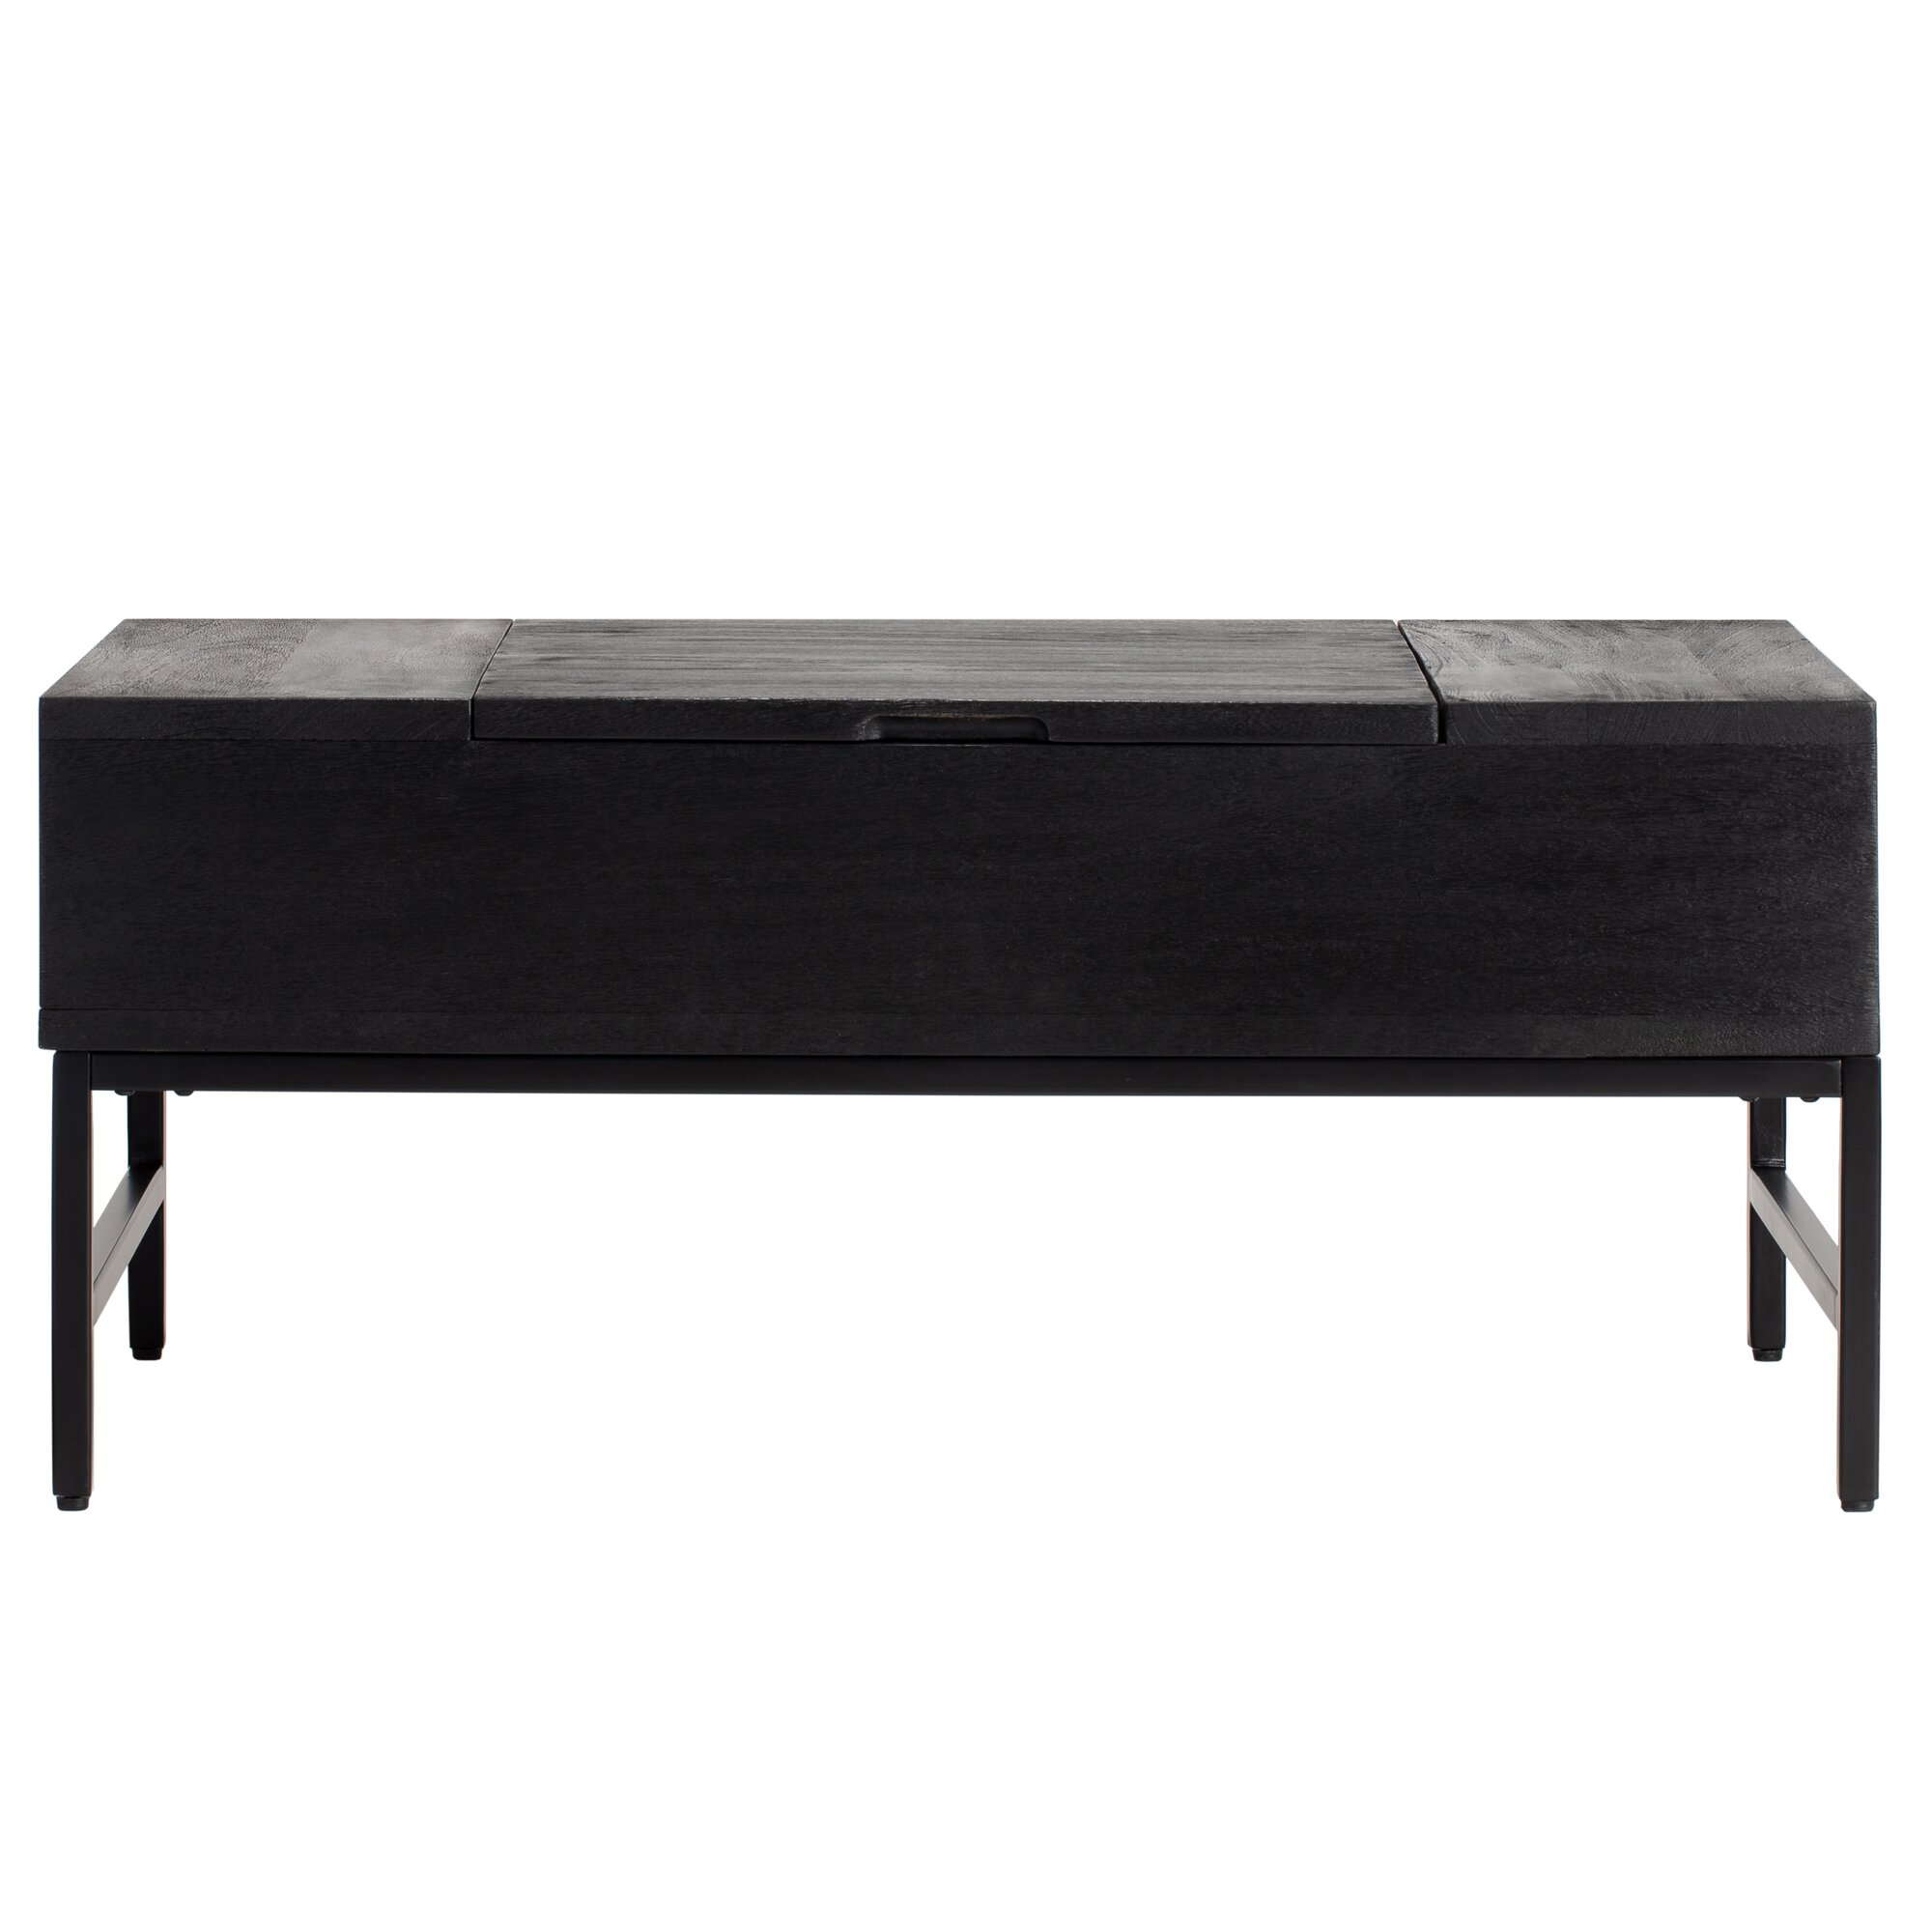 Rowley Lift Top 4 Legs Coffee Table with Storage